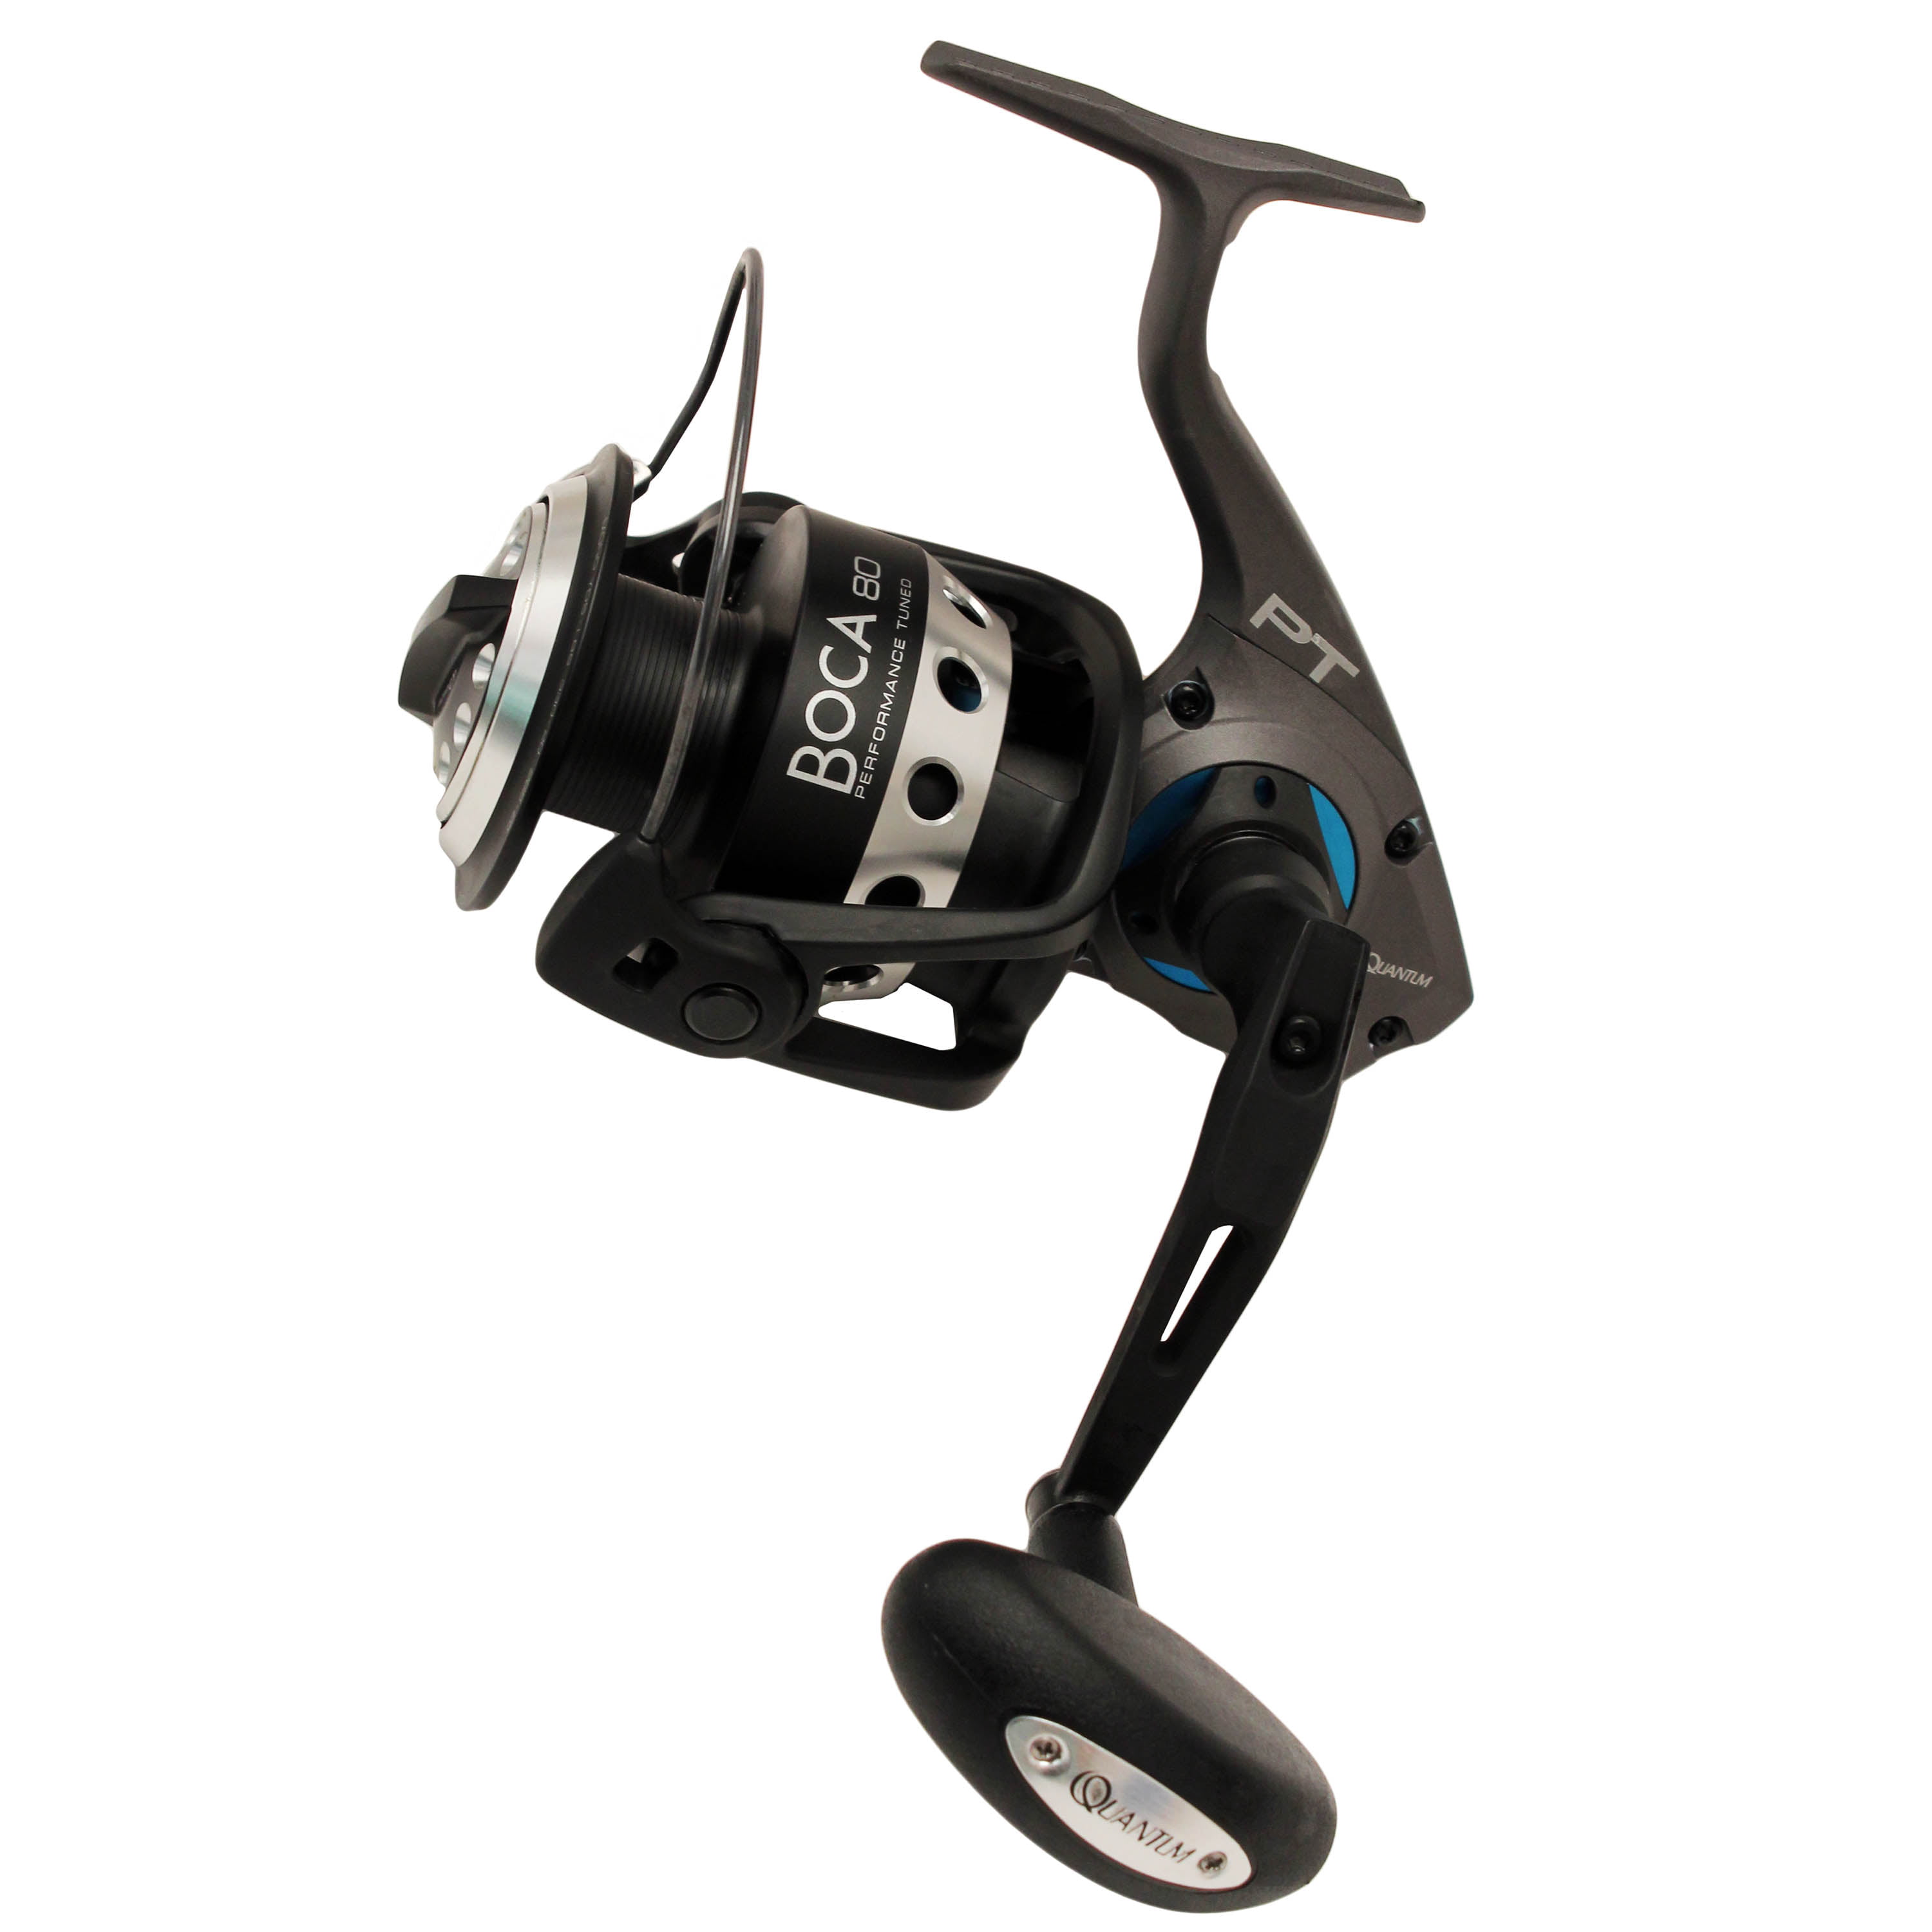 Reel spin. Катушка рыболовная Quantum Trax 40. Quantum Spin. Histar aula Ultralight 156g Carbon body 800 1000 2500 Series 11 BB 5.2:1 High ratio Saltwater resisitance Spinning Fishing.